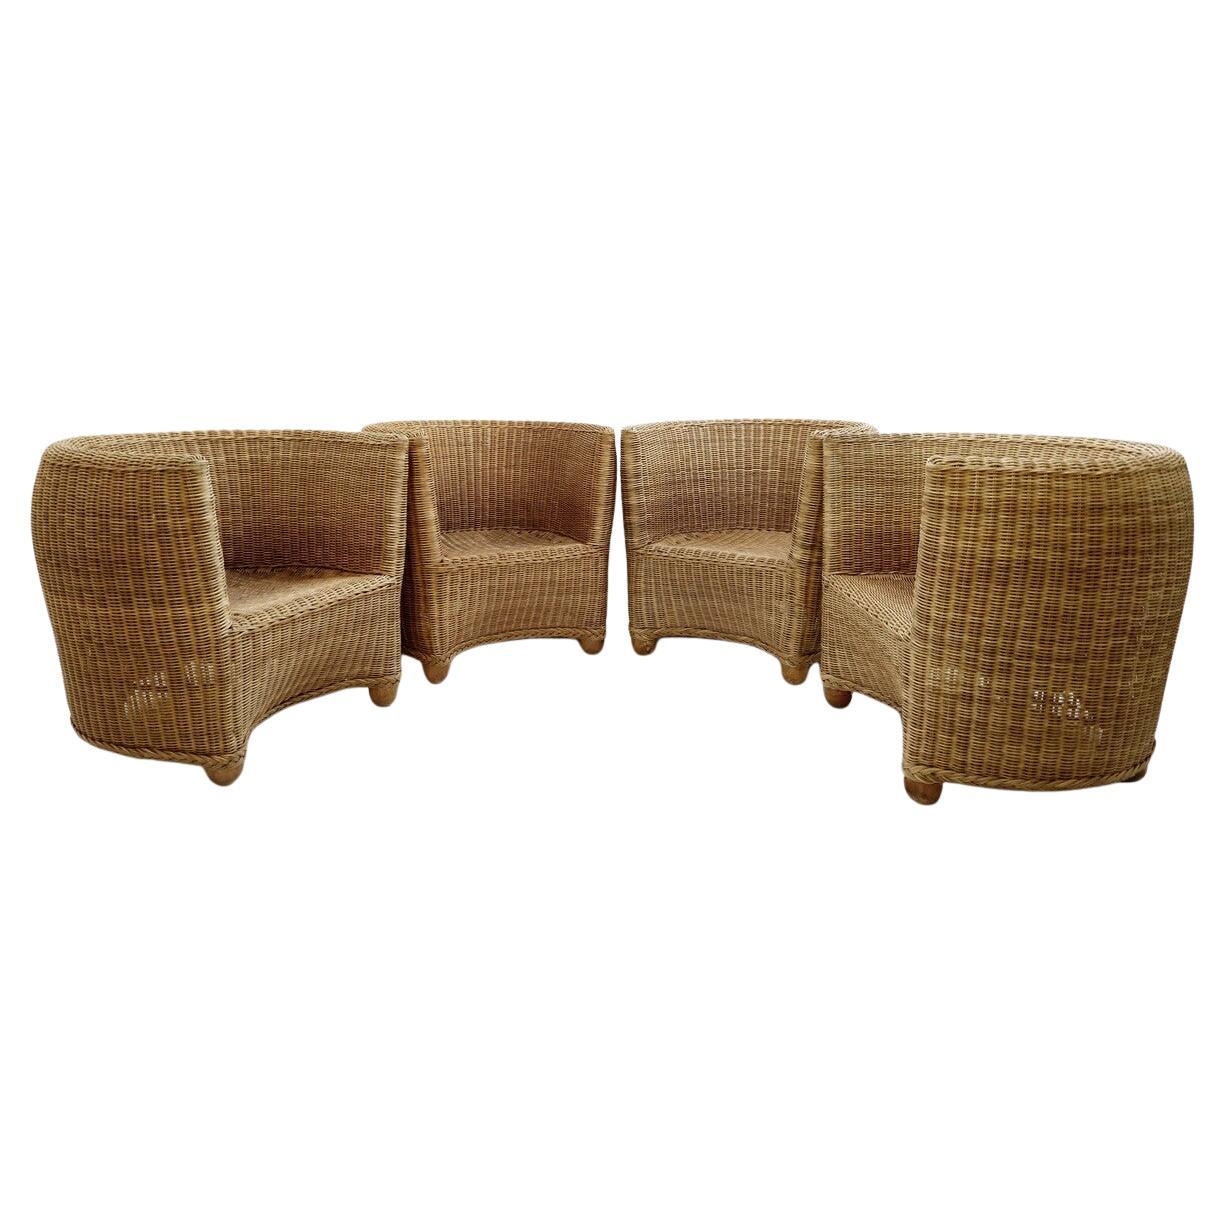 Set of 4 Mid-Century Modern Wickers Armchairs For Sale